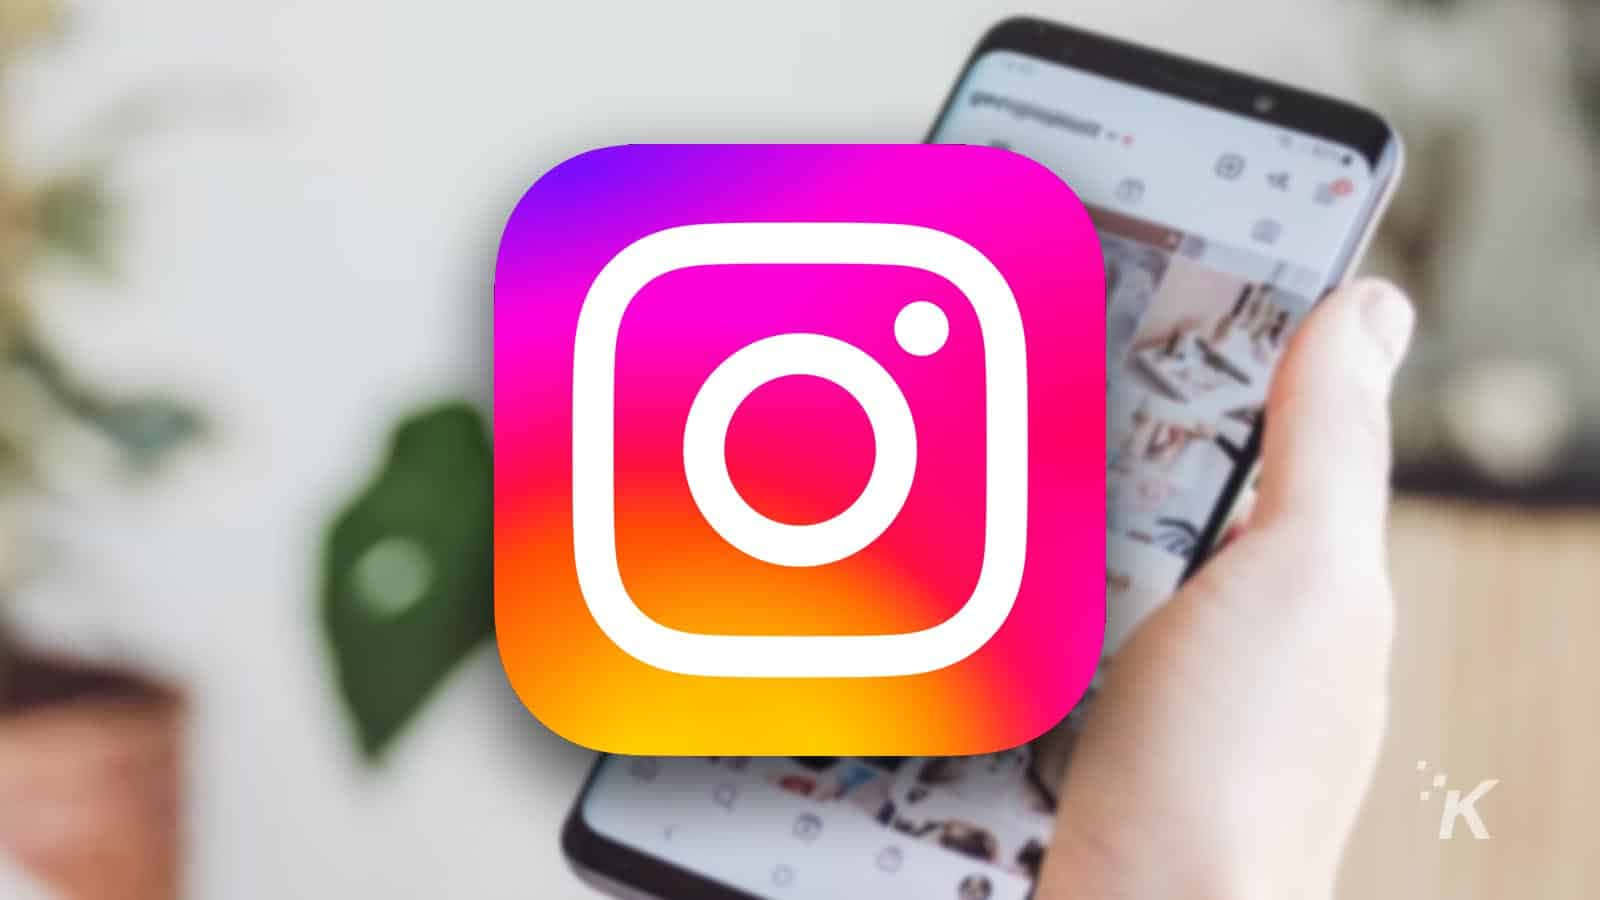 Stay creative with your Instagram posts - make your page stand out!